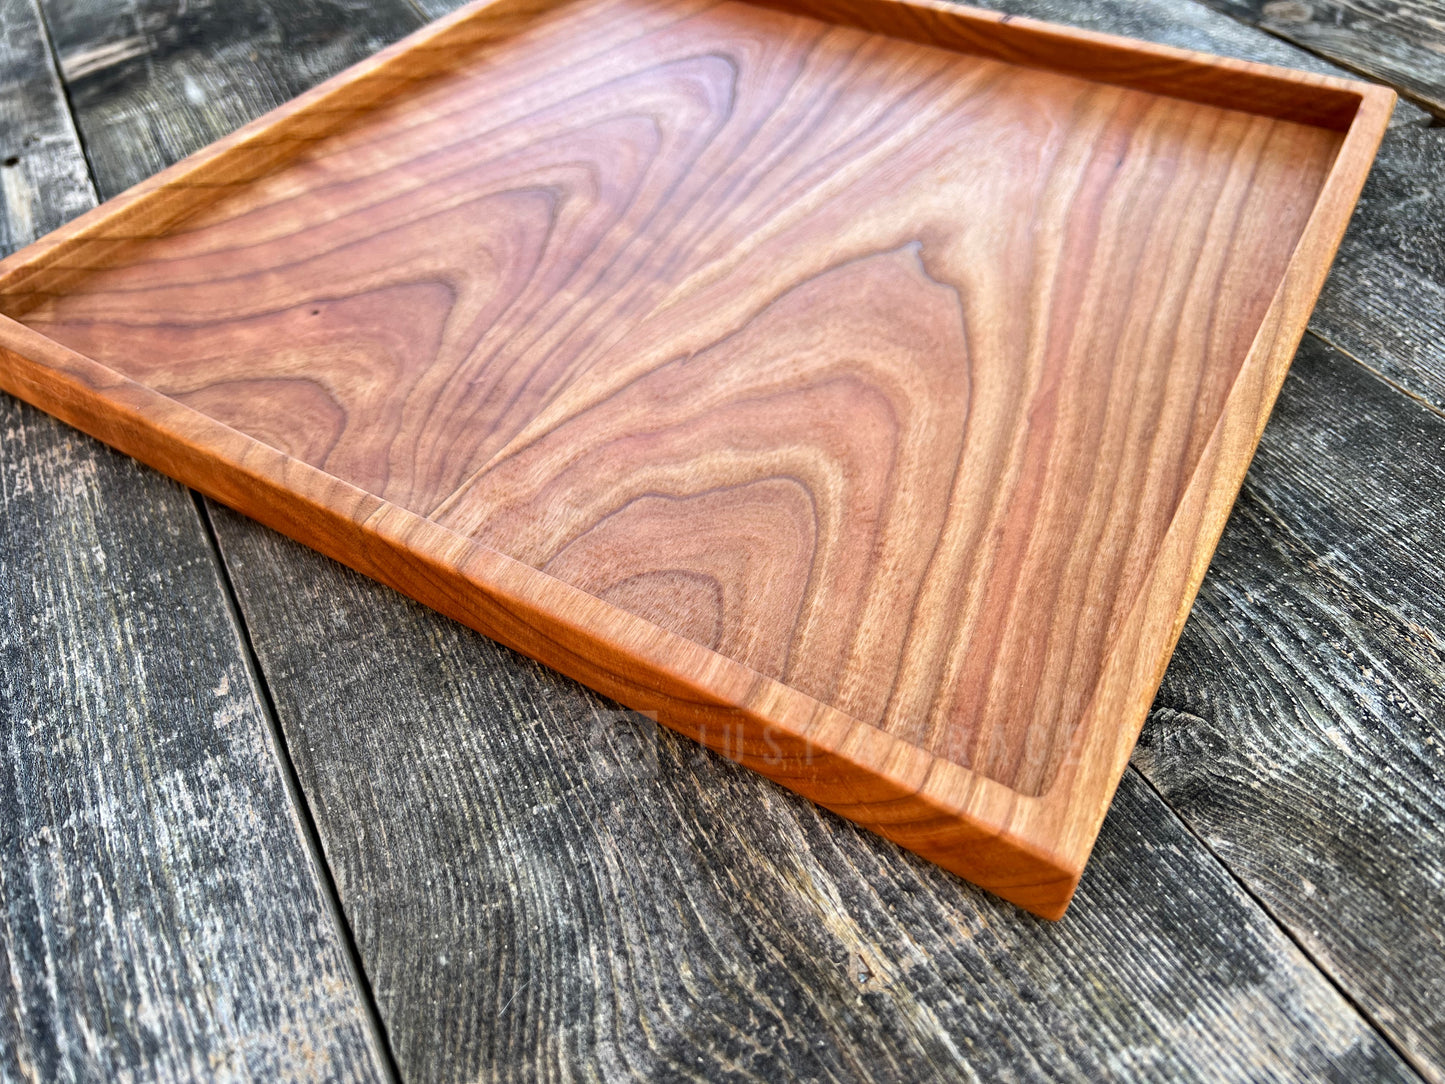 12" Square Cherry Tray, Grazing Board, Charcuterie Board, Coffee Table, Ottoman Tray, Wood Platter, Serving Tray, Wood Dish, Handmade Gift